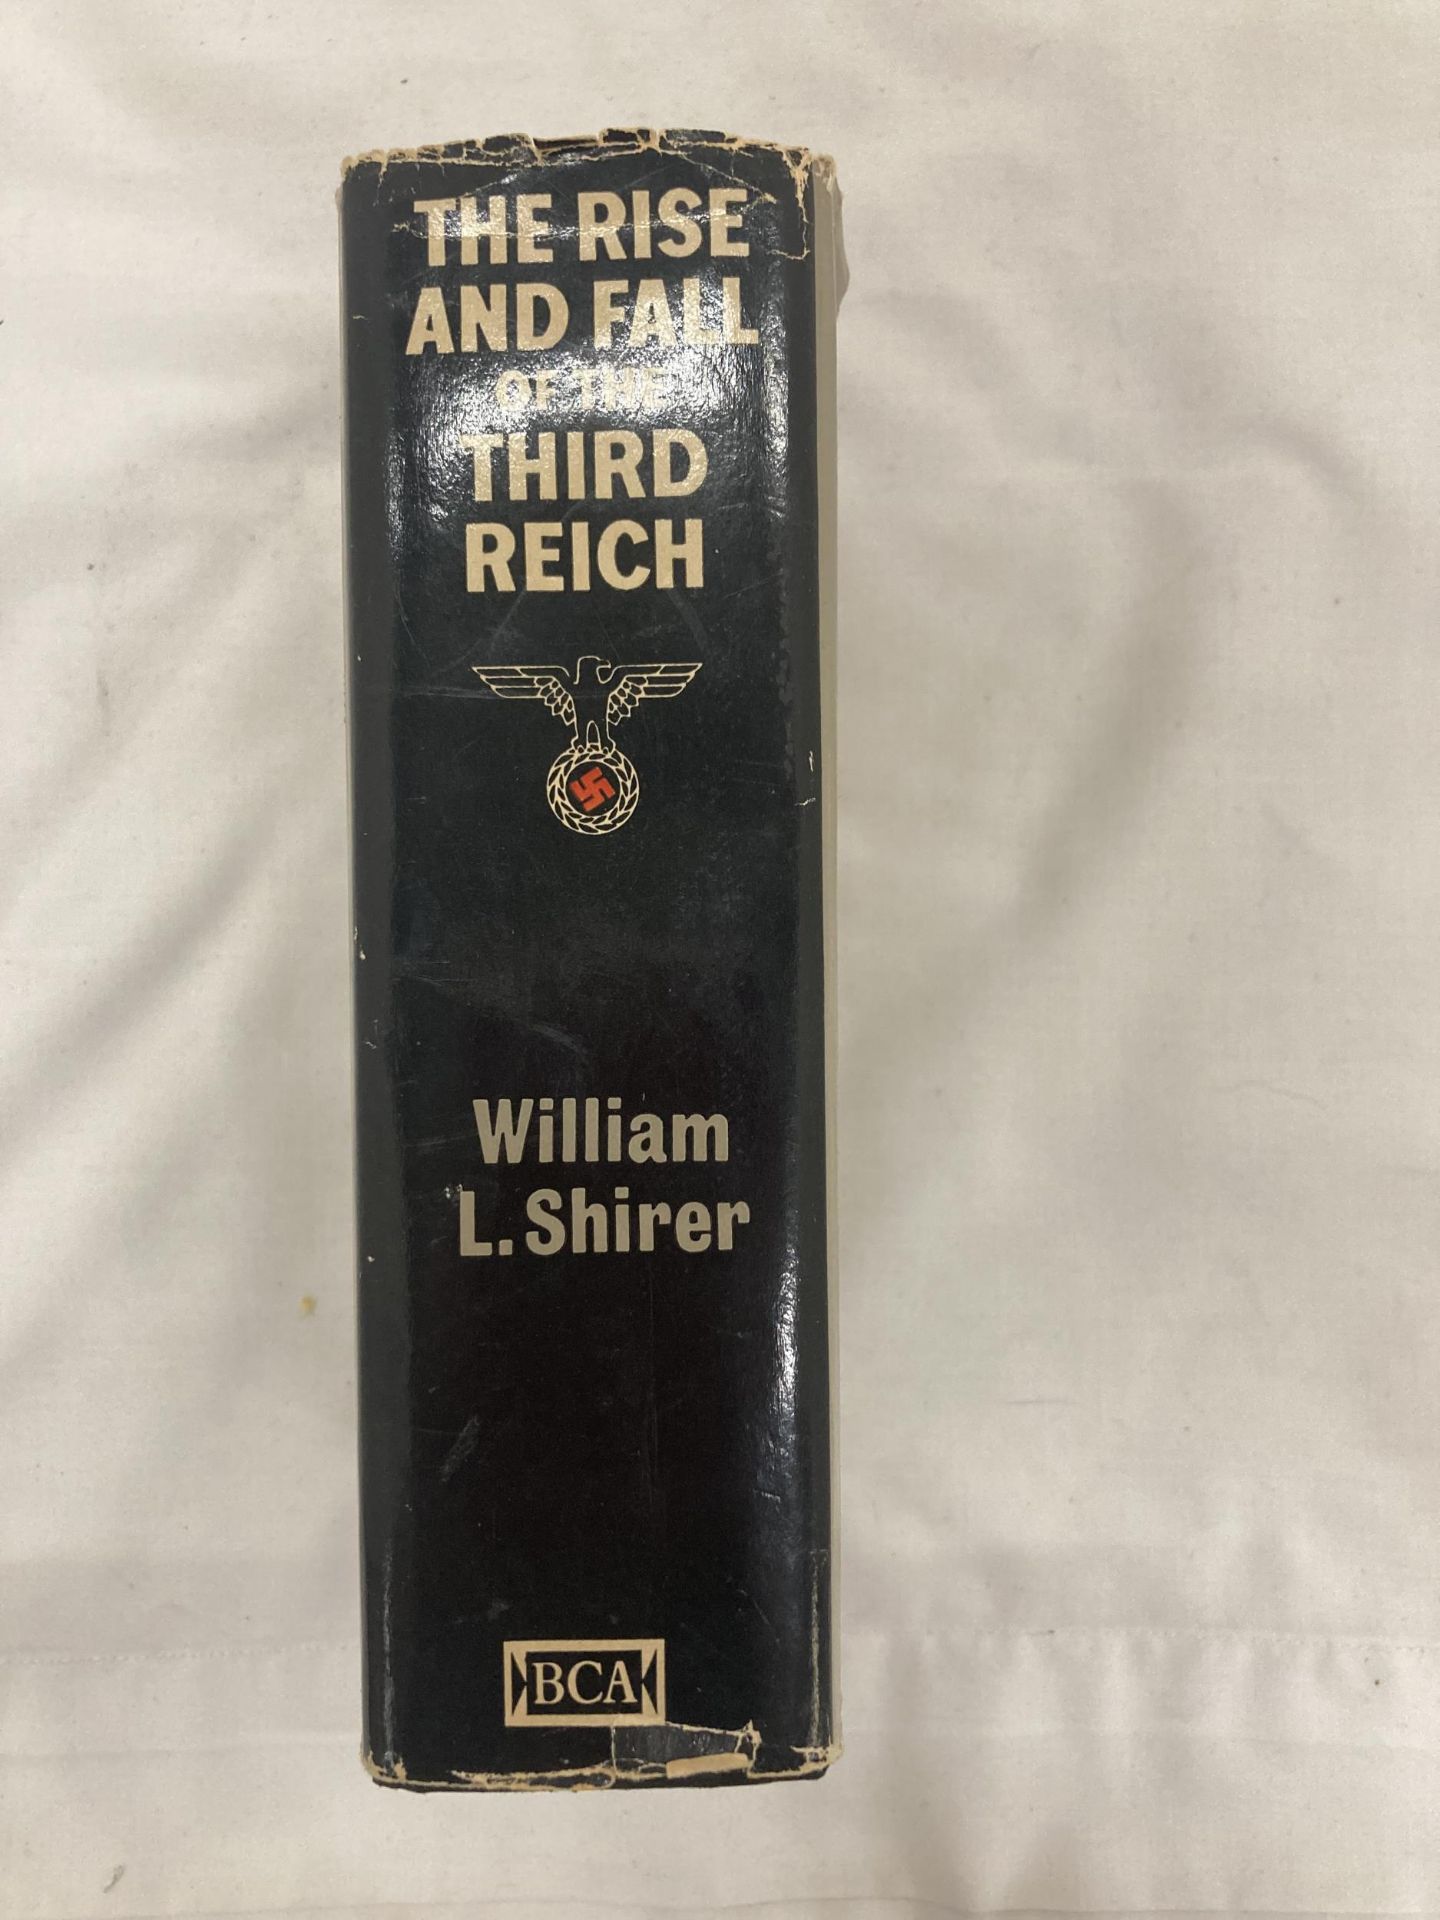 A COPY OF 'THE RISE AND FALL OF THE THIRD REICH', A HISTORY OF NAZI GERMANY BY WILLIAM L. SHIRER - Image 3 of 3